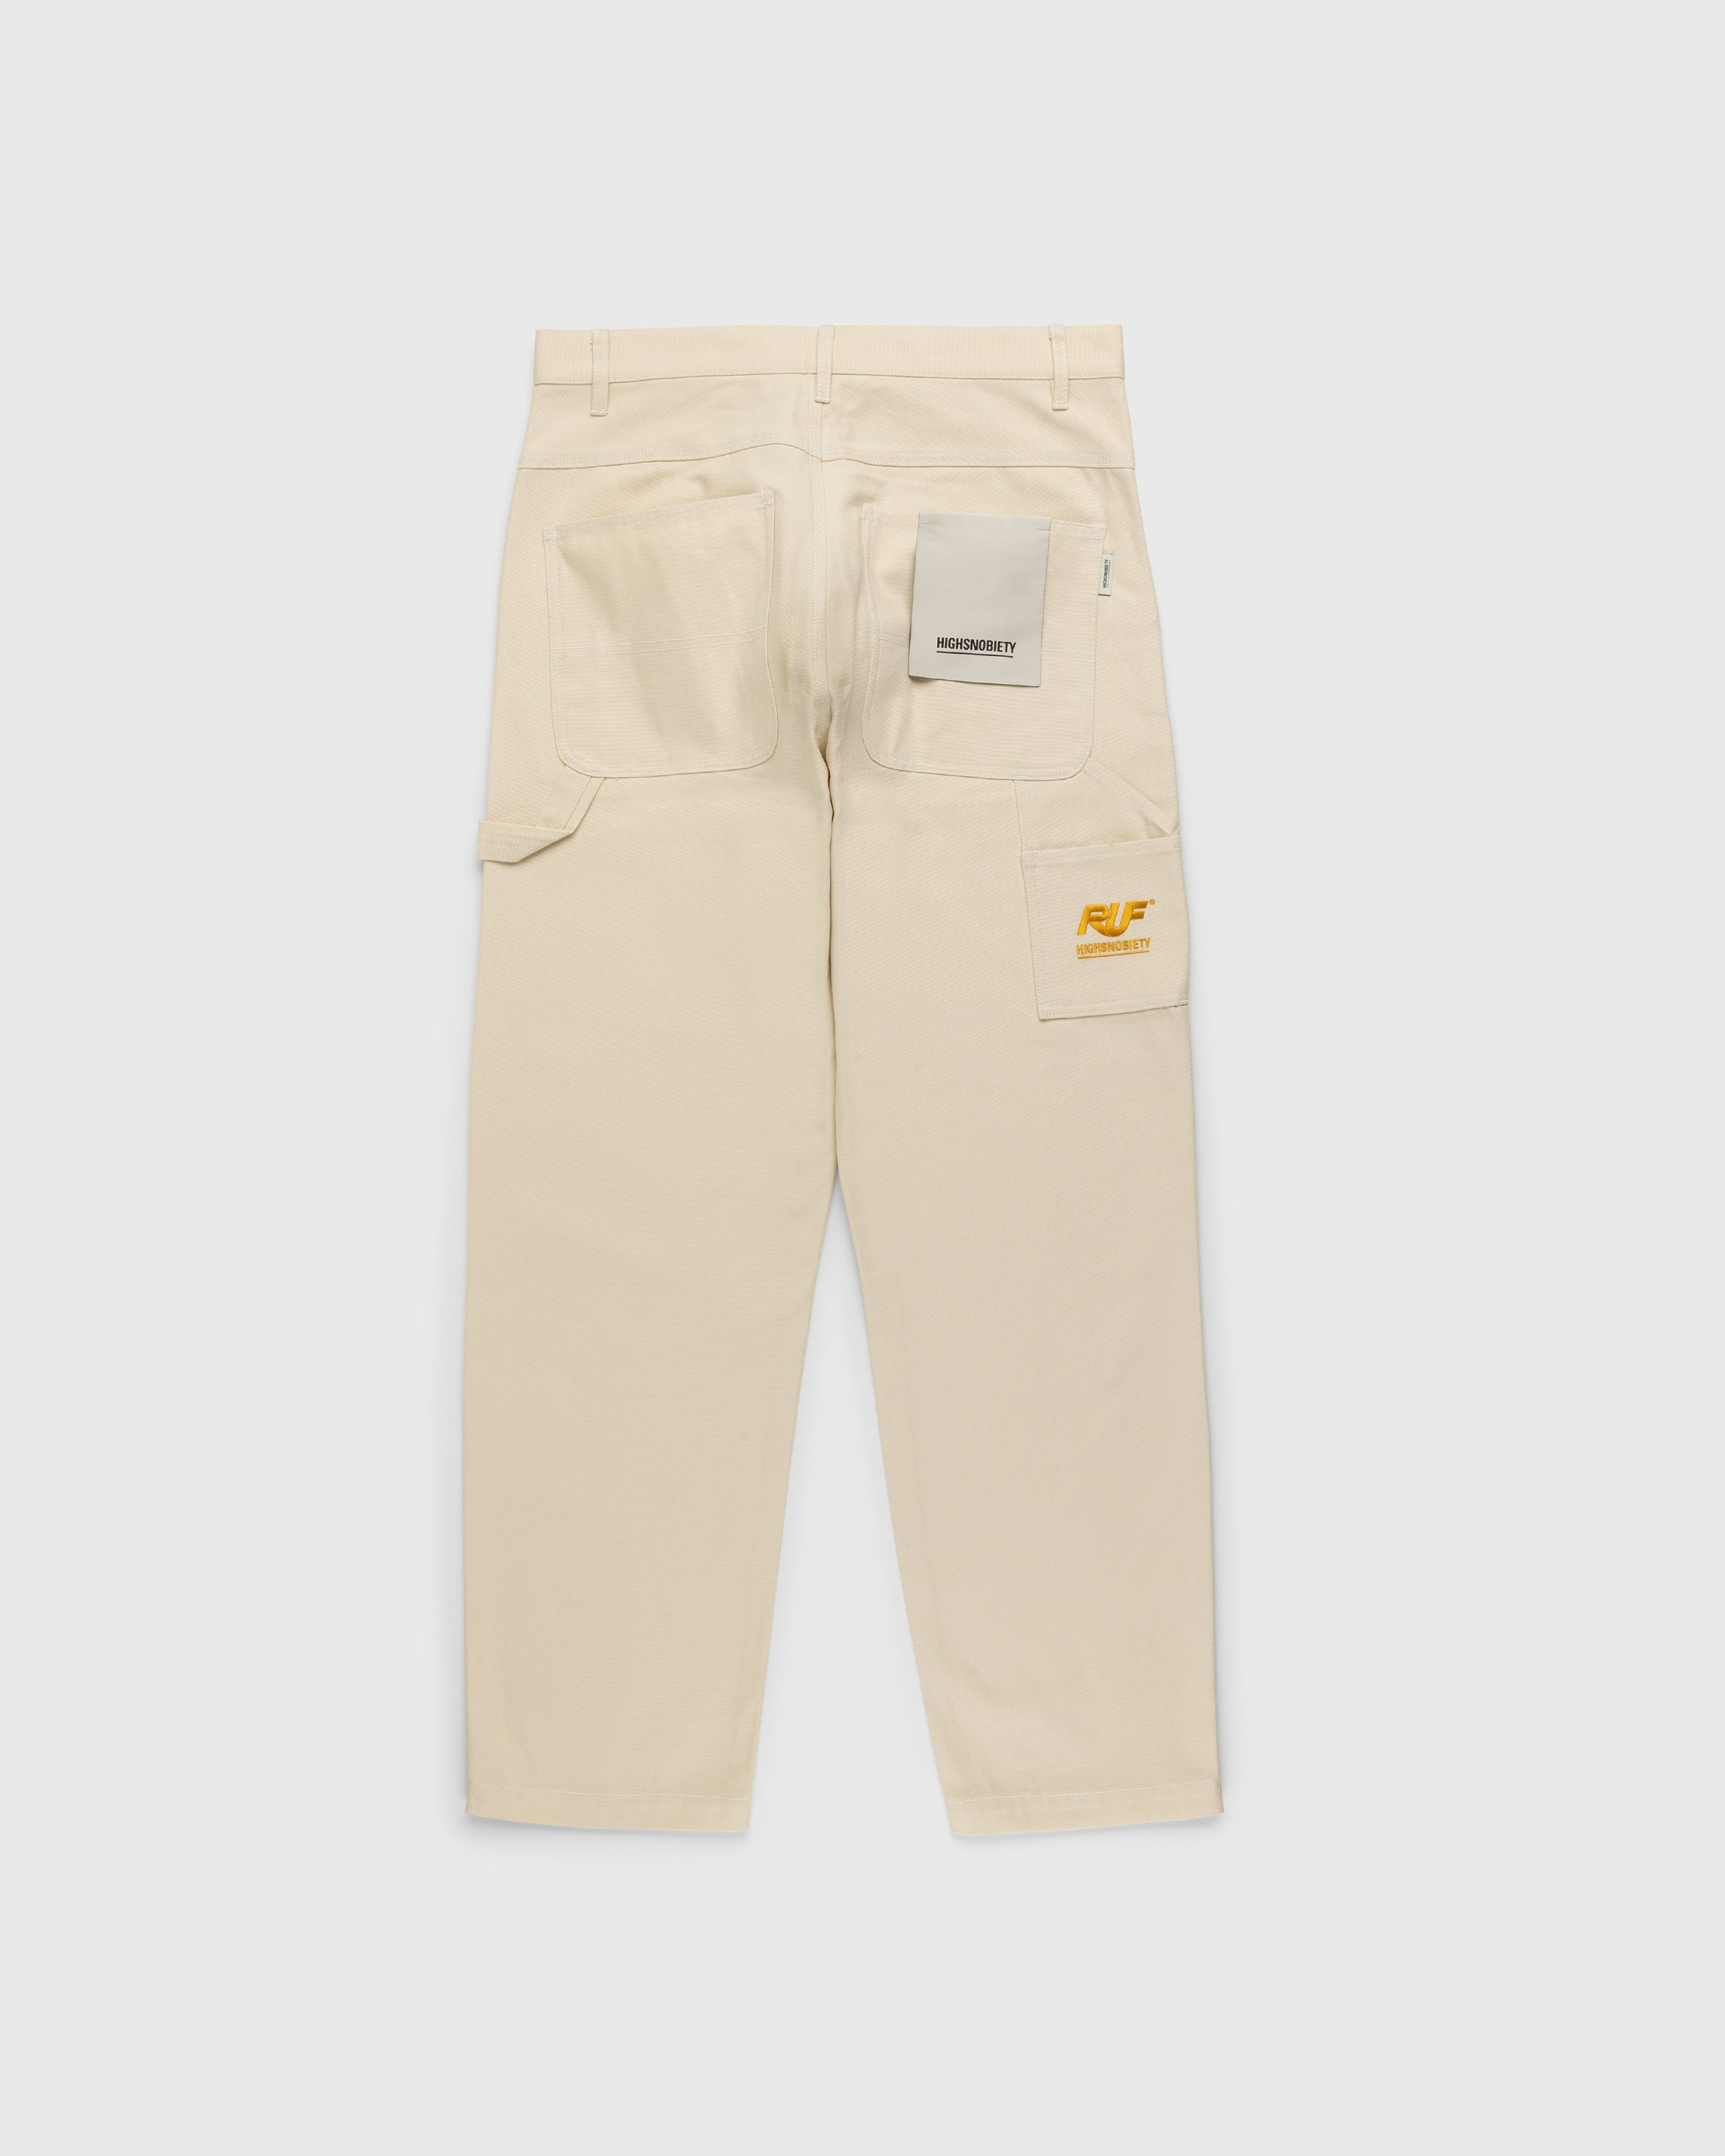 RUF x Highsnobiety - Cotton Work Pants Natural - Clothing - Beige - Image 1